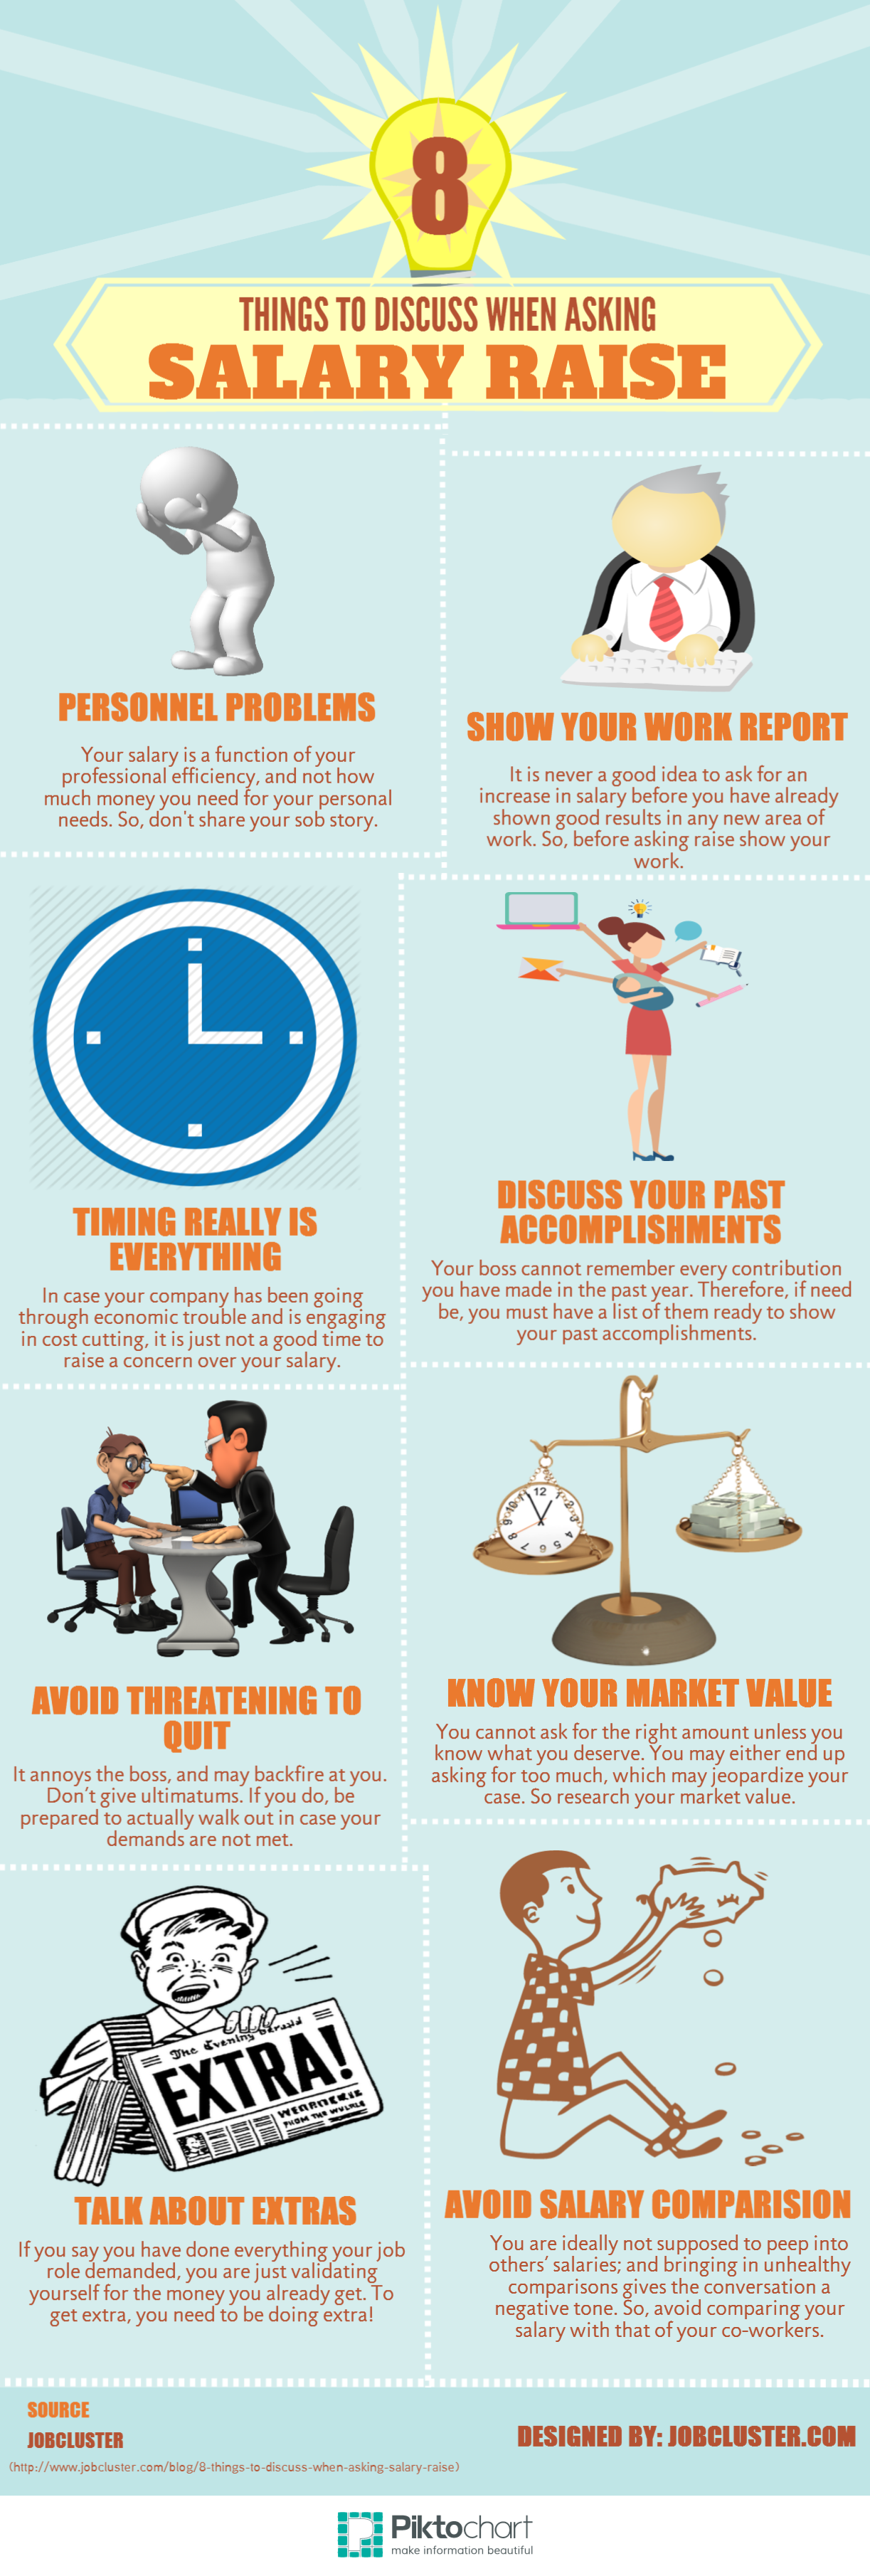 8 Things to Discuss for Asking Salary Raise infographic